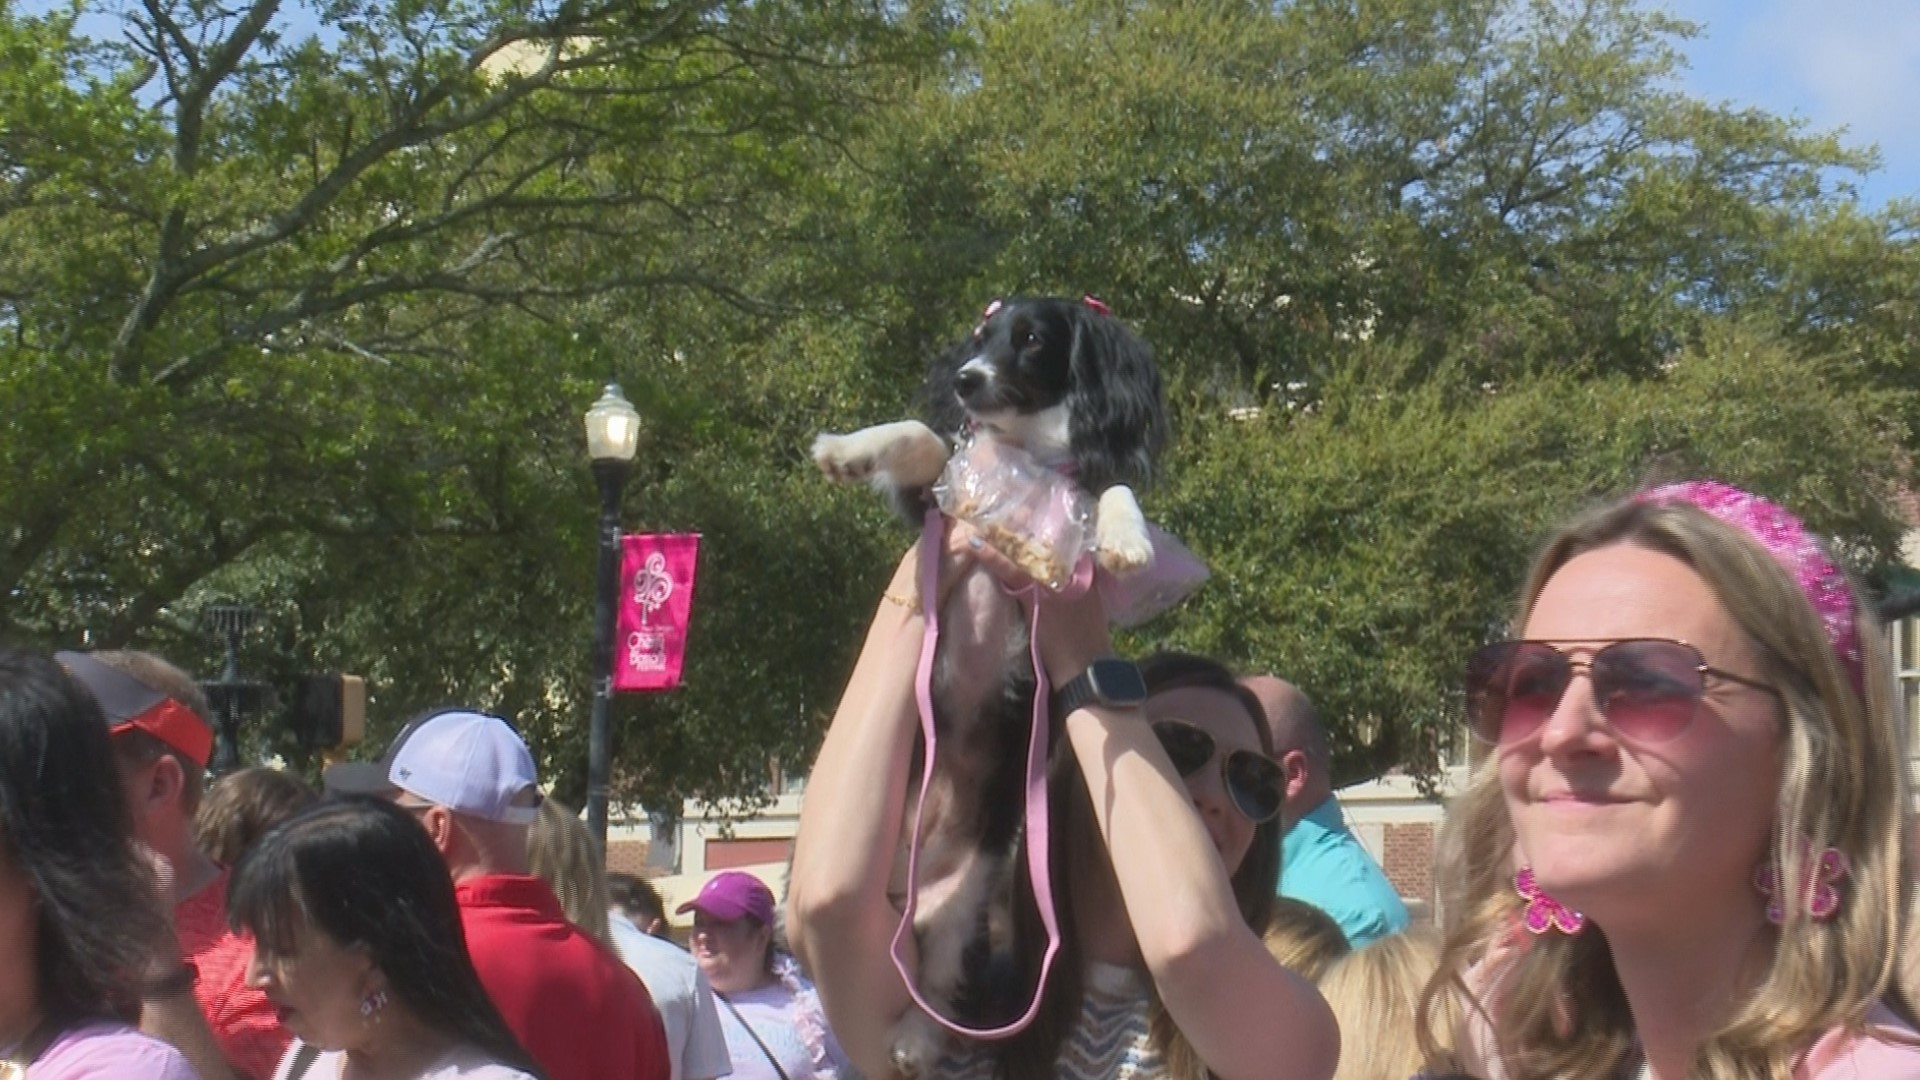 From musical chairs to the wiener dog race the city of Macon came together for some first-day fun here at the Cherry Blossom festival.